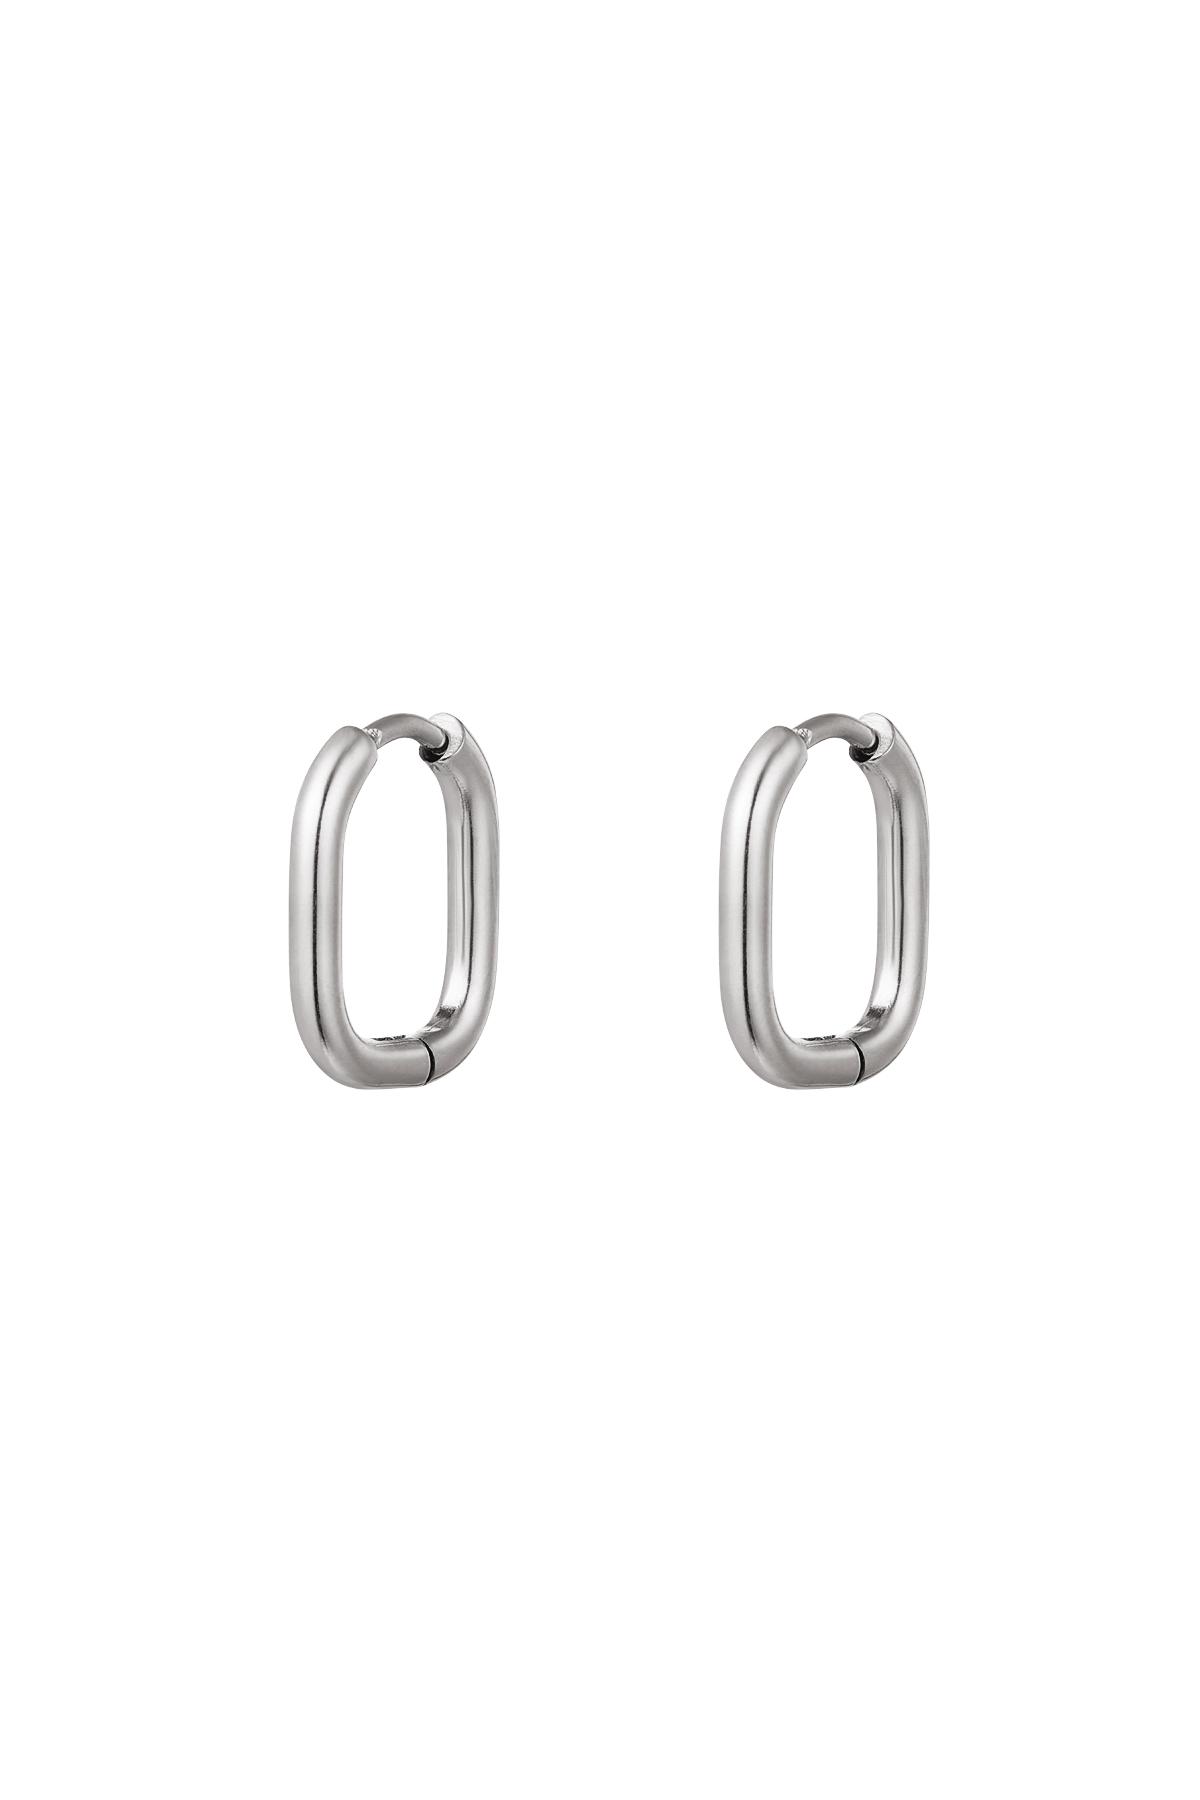 Earrings classic - small Silver Stainless Steel h5 